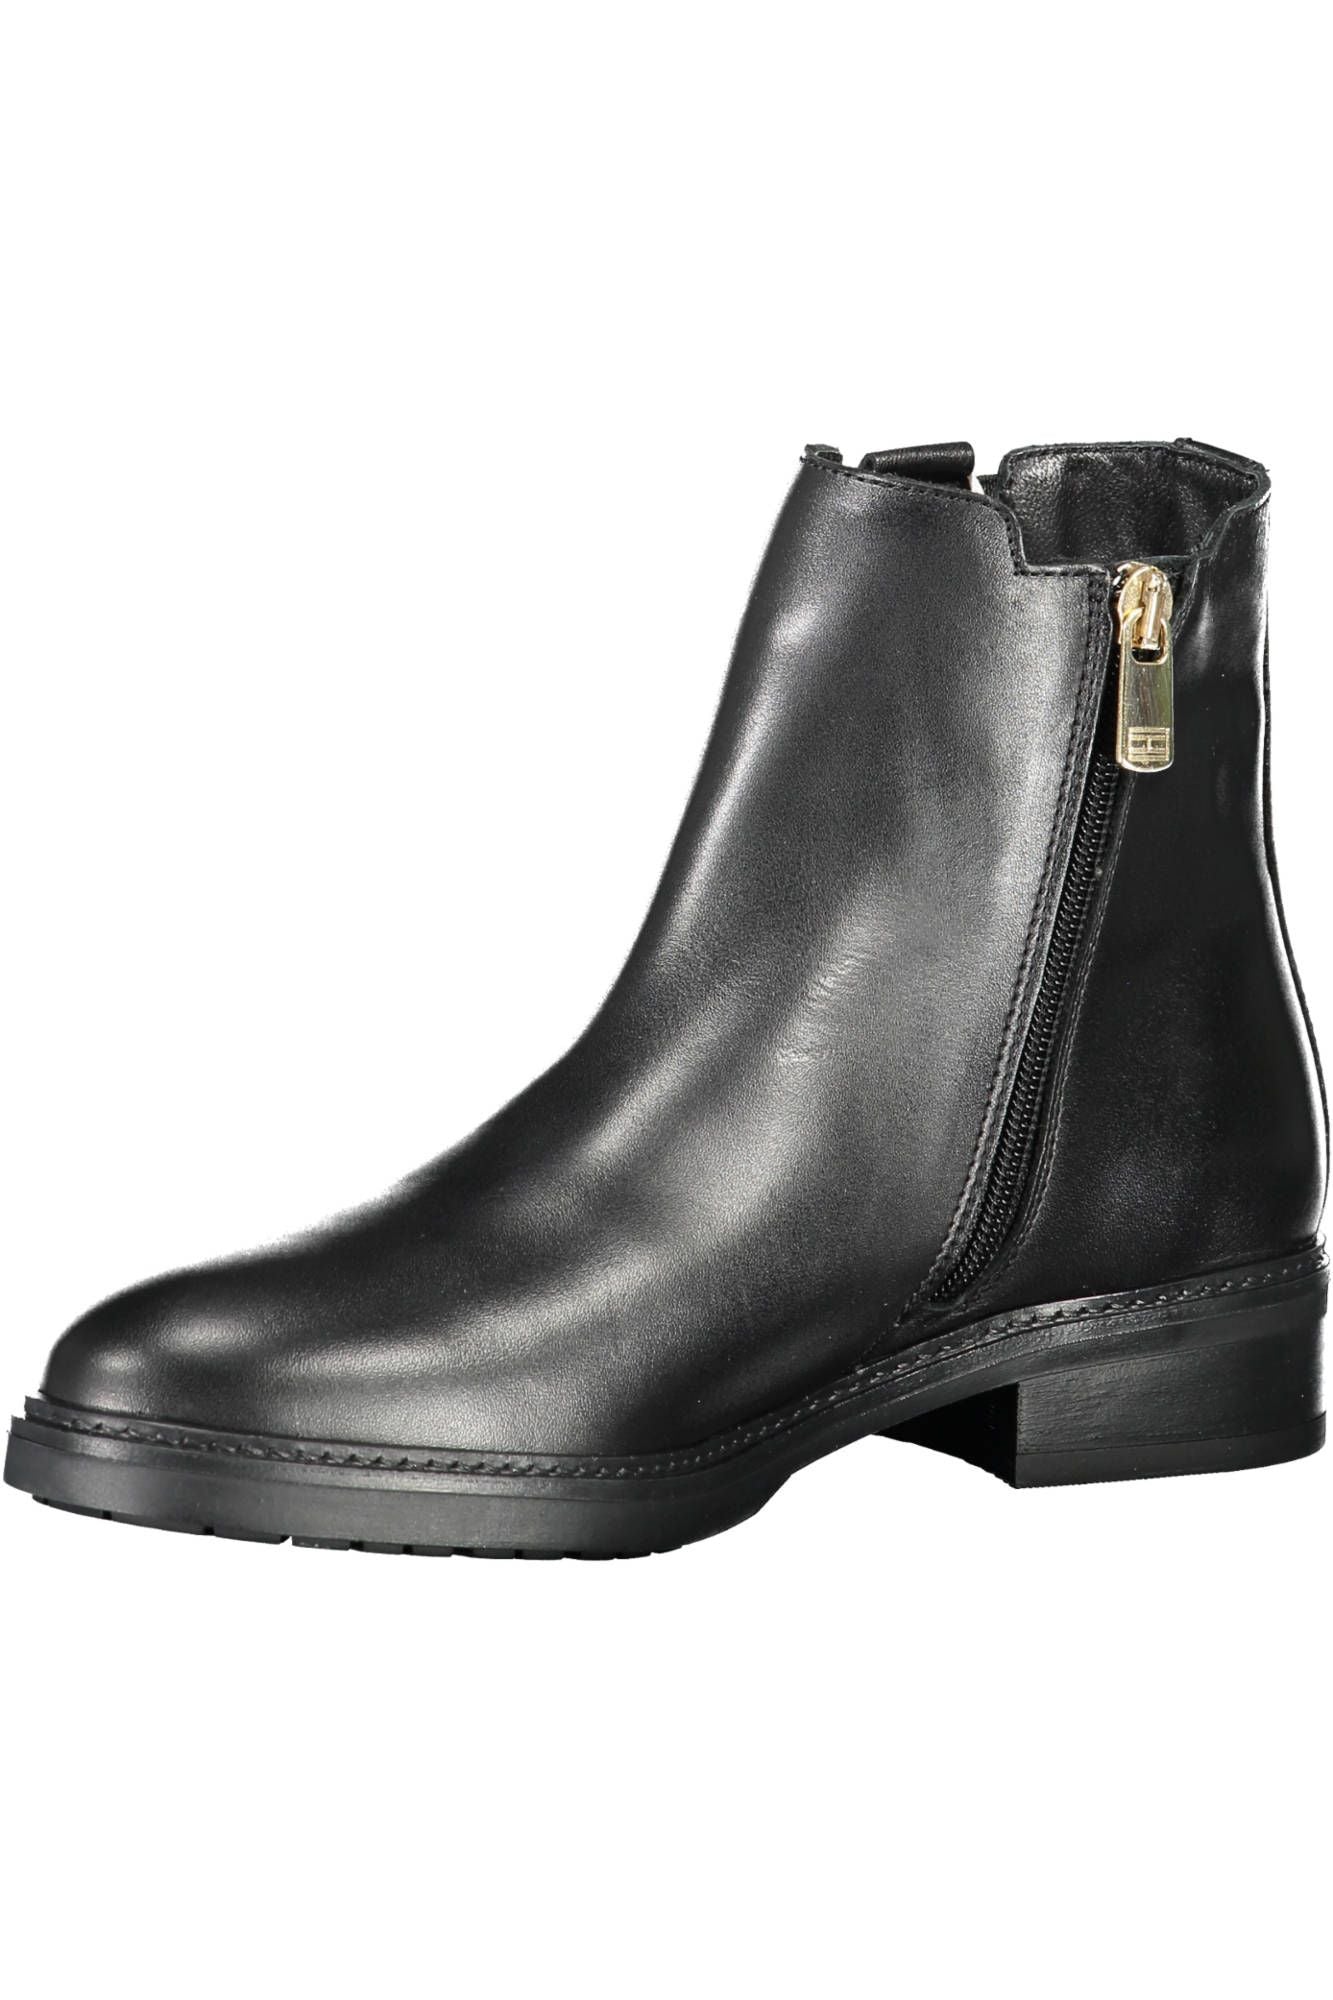 Tommy Hilfiger Chic Ankle Boot with Contrast Detailing and Side Zip